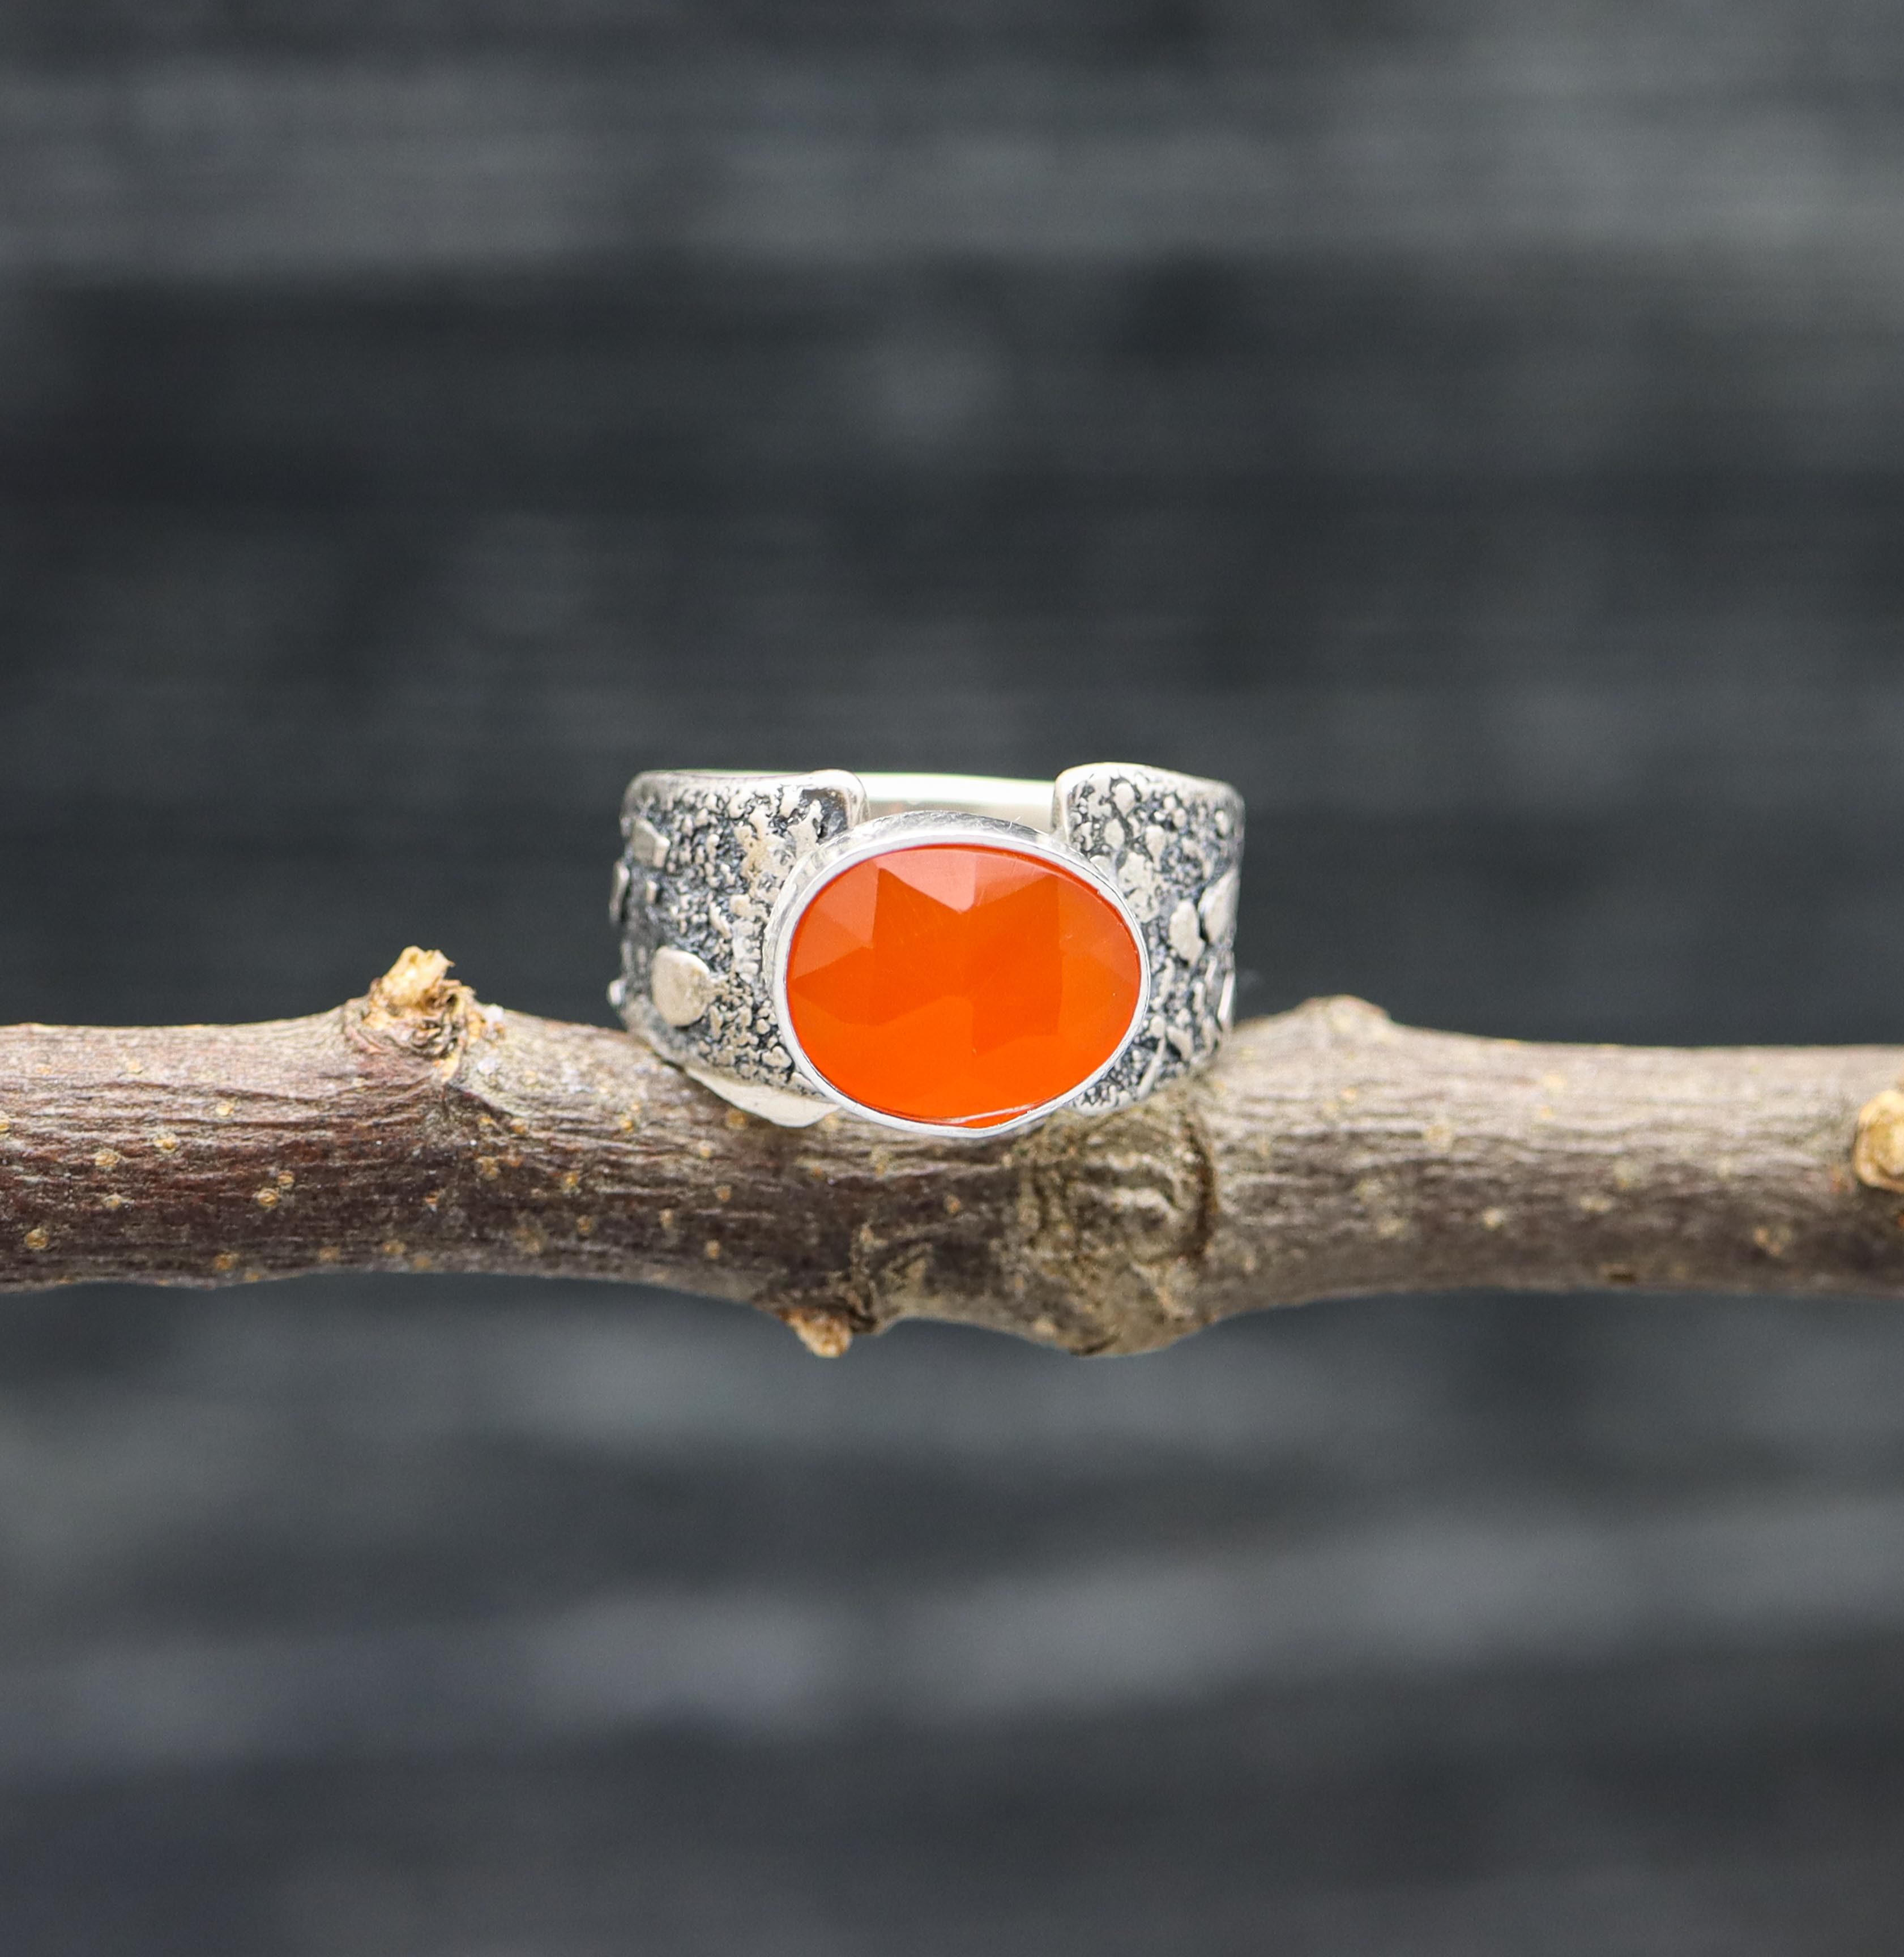 Orange Carnelian Sterling Silver Ring Made to Finish